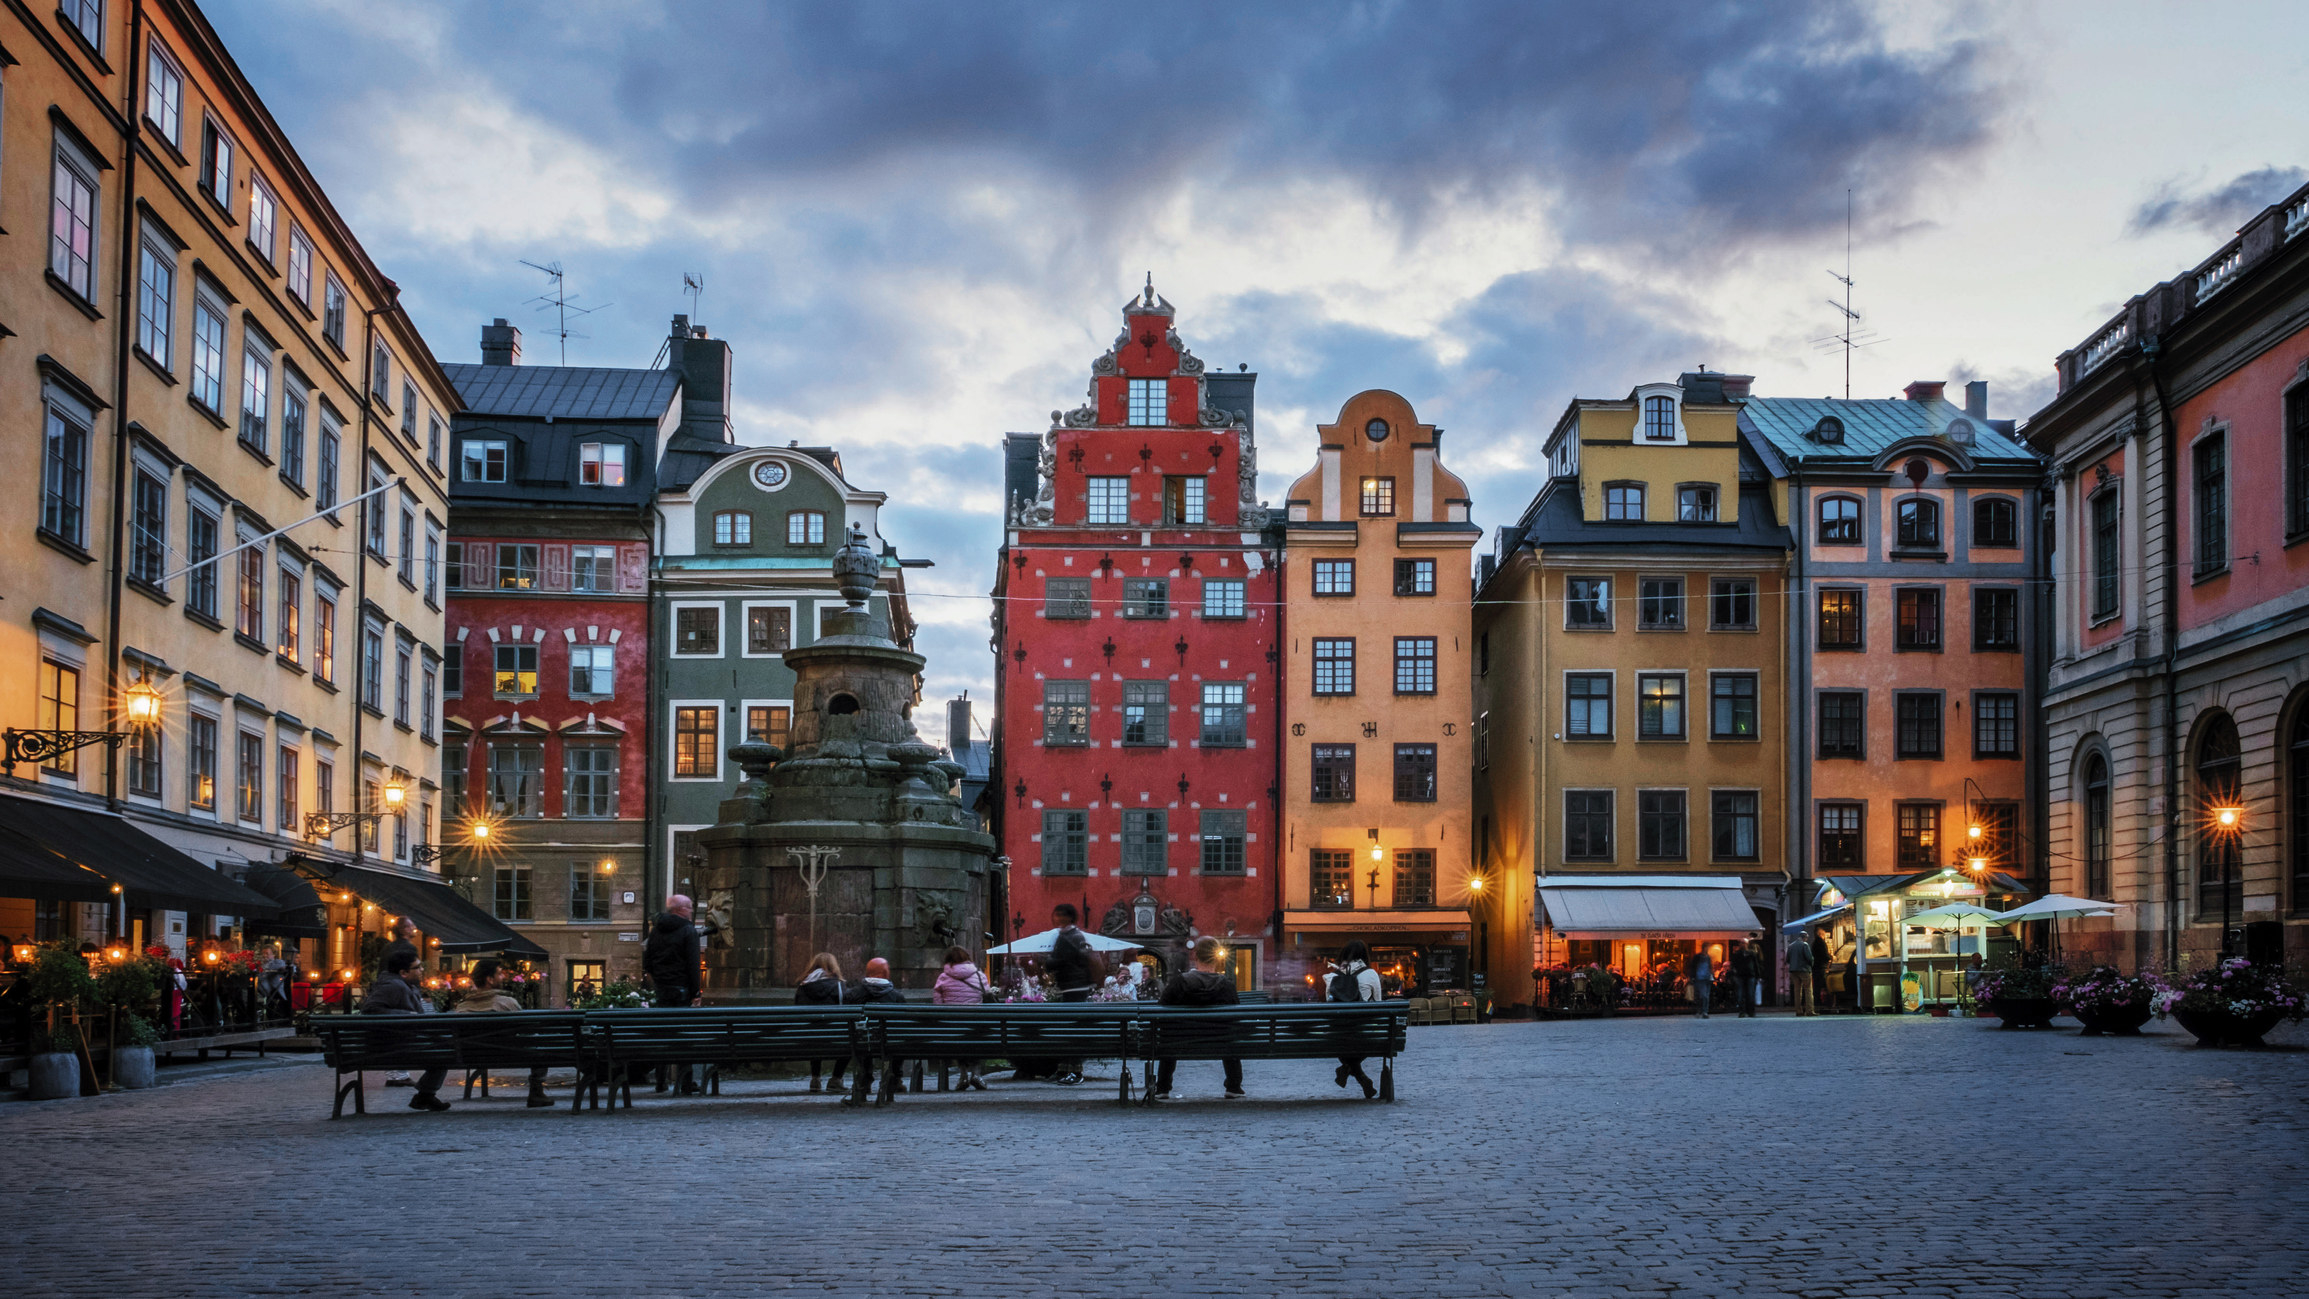 A square in Stockholm surrounded by colorful buildings